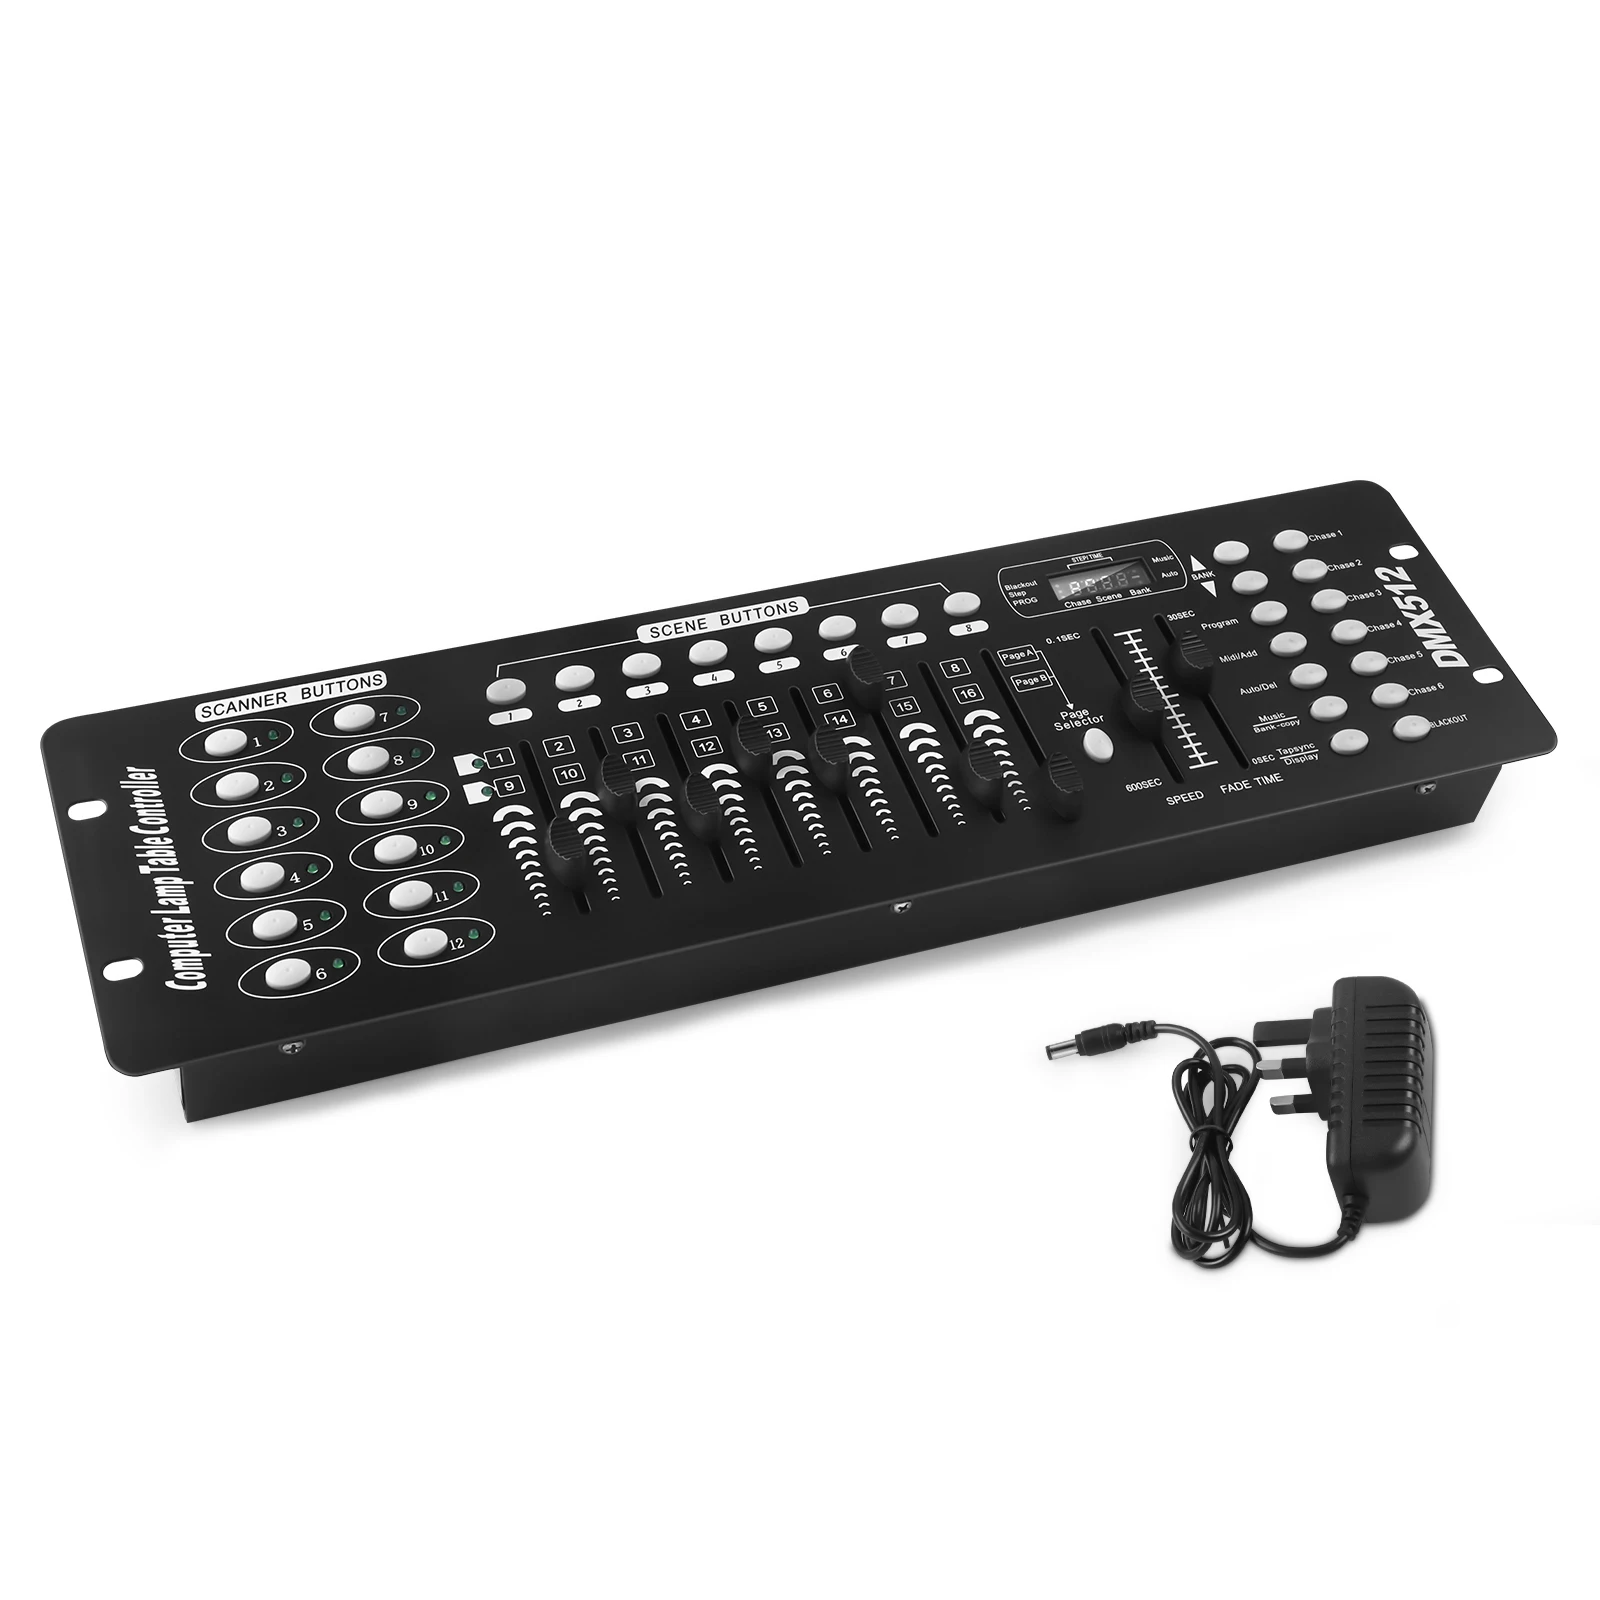 

Black Grand Console DMX and MIDI Operator 192 Channel Light Controller for Live Concerts KTV DJs Clubs